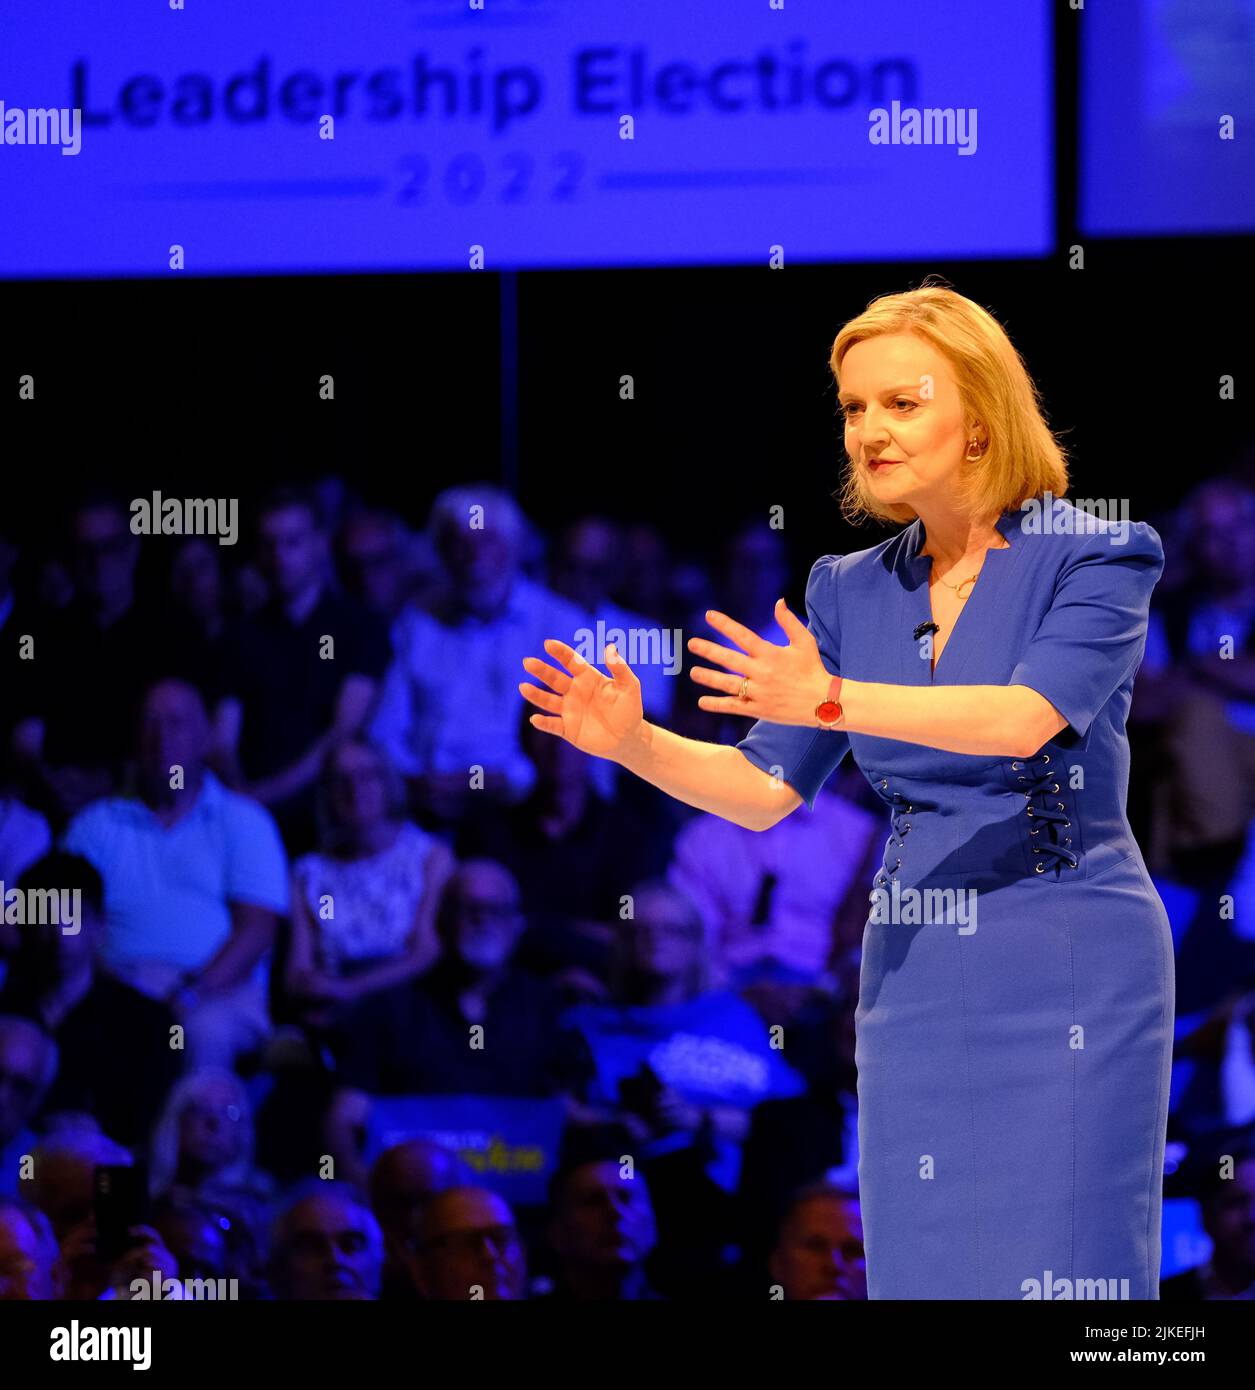 Exeter Devon UK.2nd Conservative Party Hustings. Tory members gathered in the Great Hall at Exeter University.Liz Truss MP puts her case forward for the leadership job. Credit: charlie bryan/Alamy Live News Stock Photo